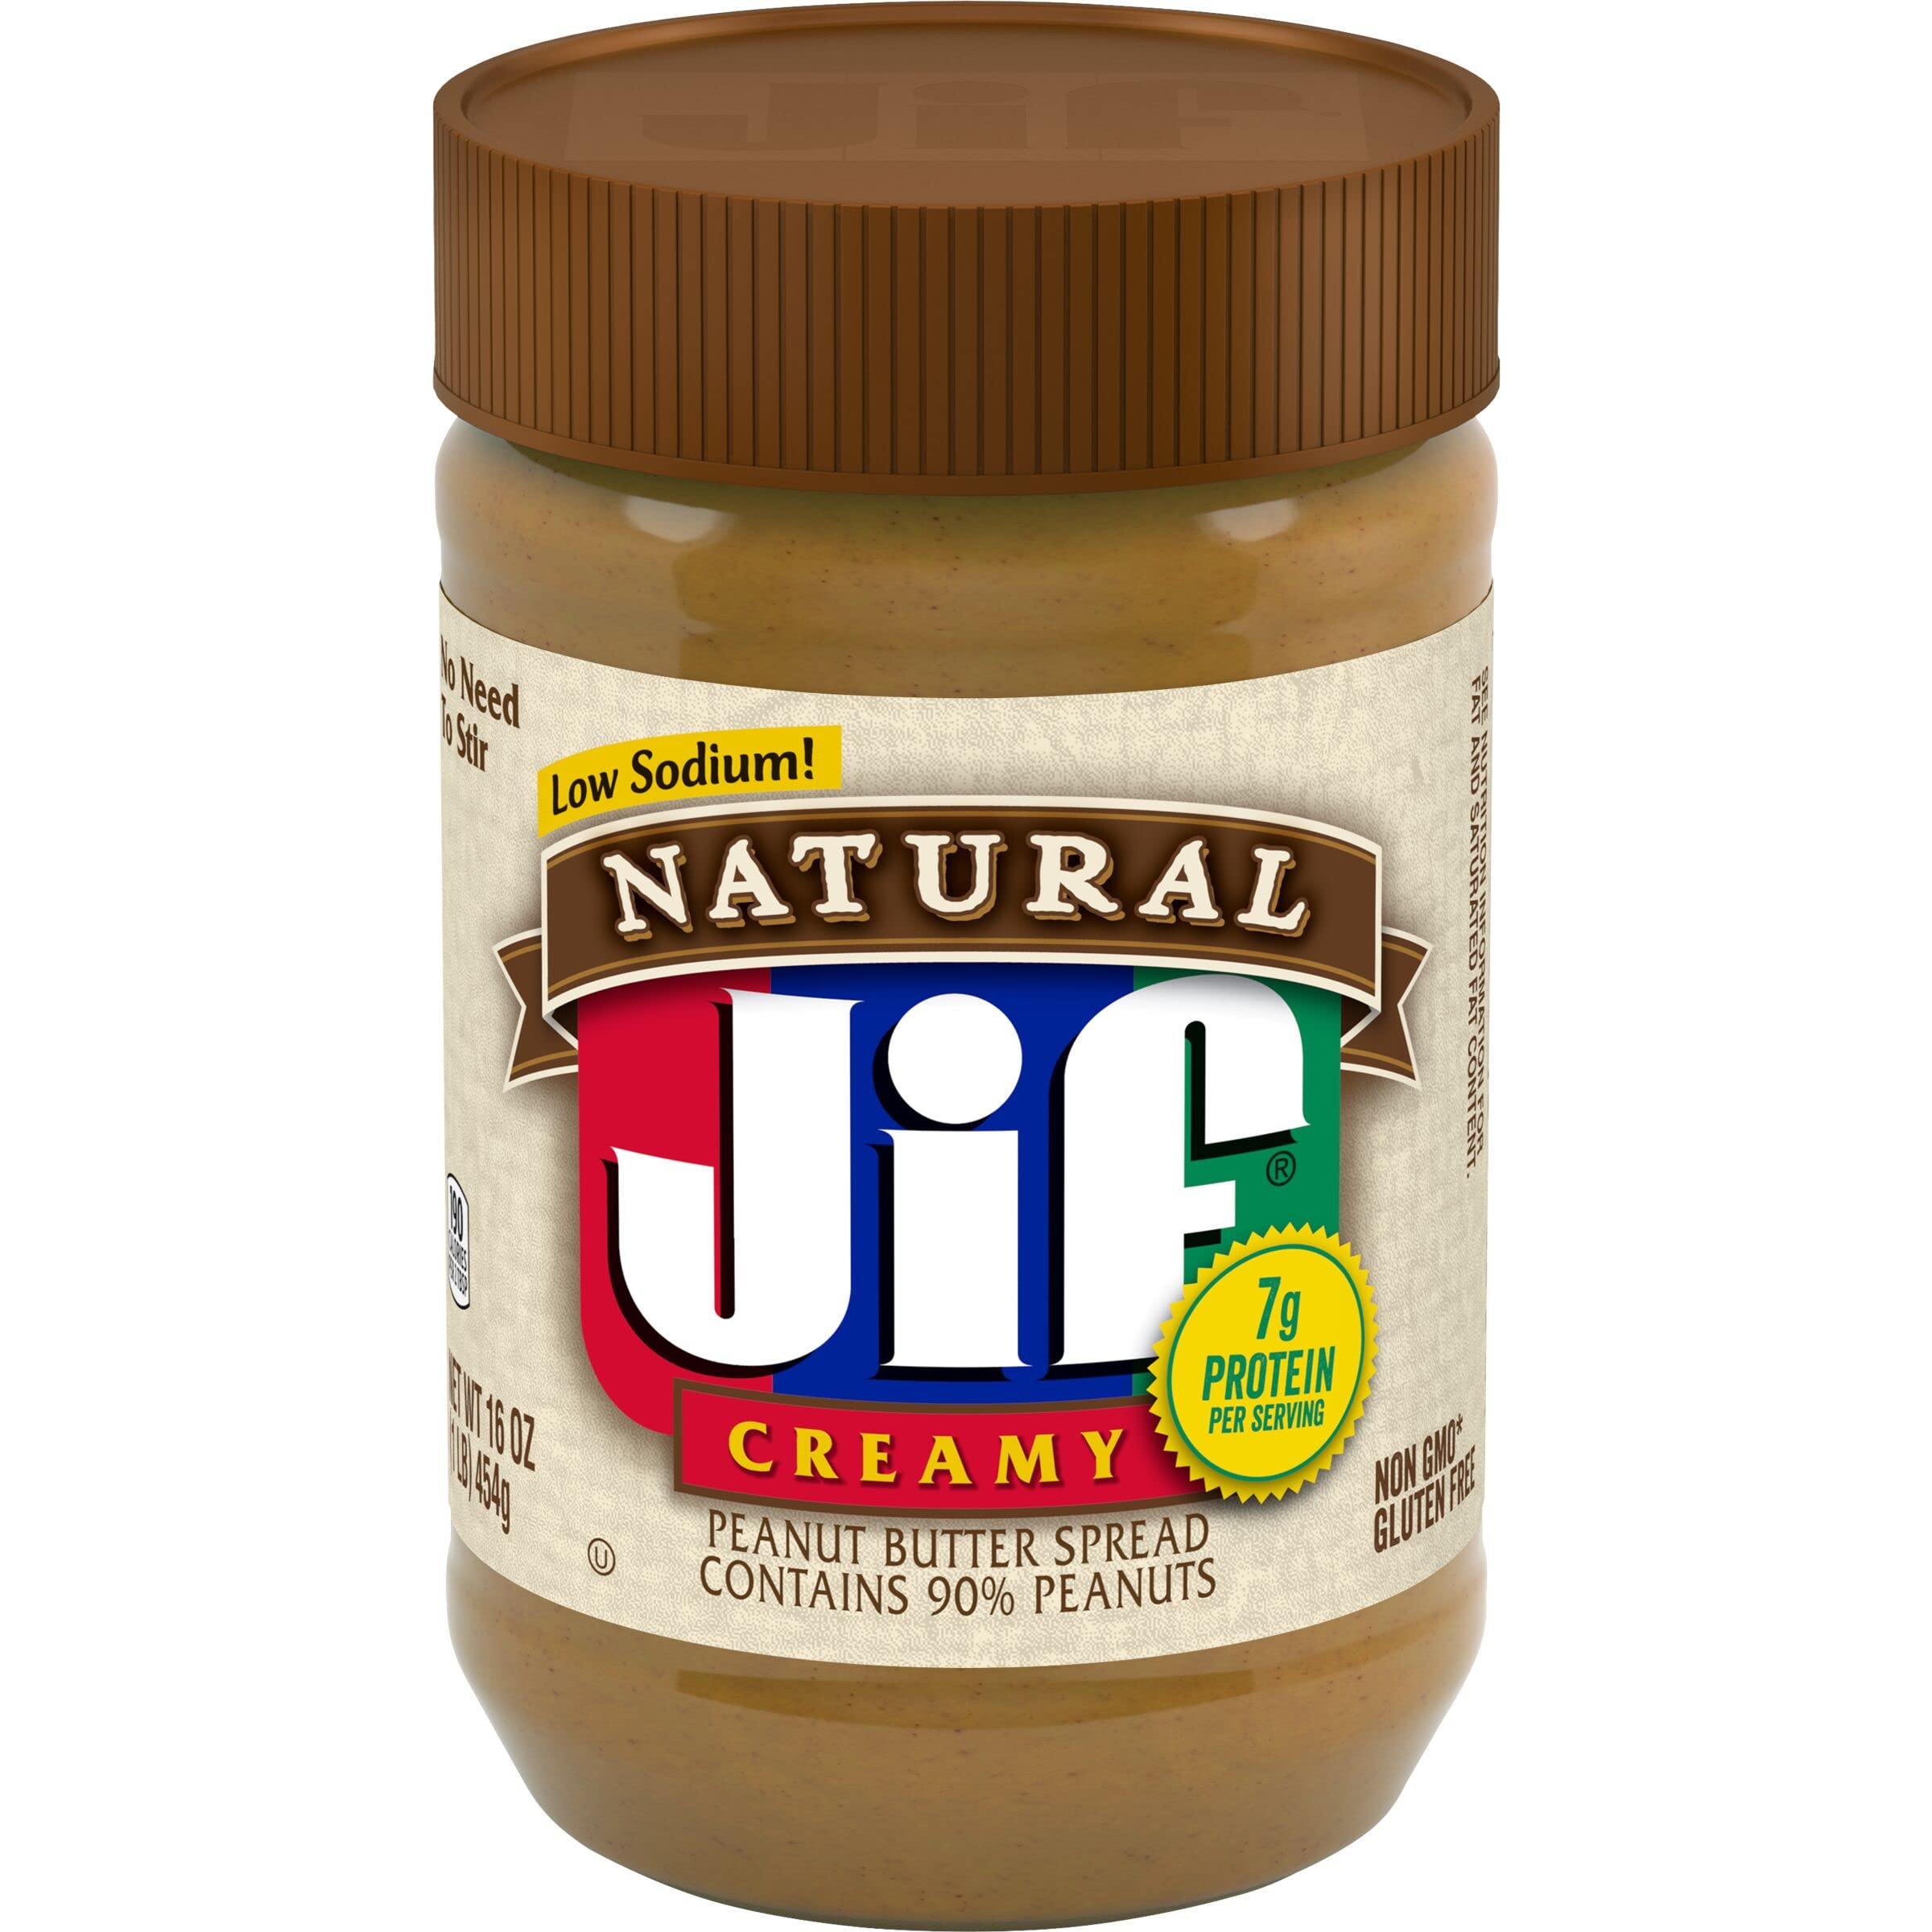 Jif Natural Creamy Peanut Butter Spread, 16 Ounces (Pack of 12), Contains 90% Peanuts $14.35